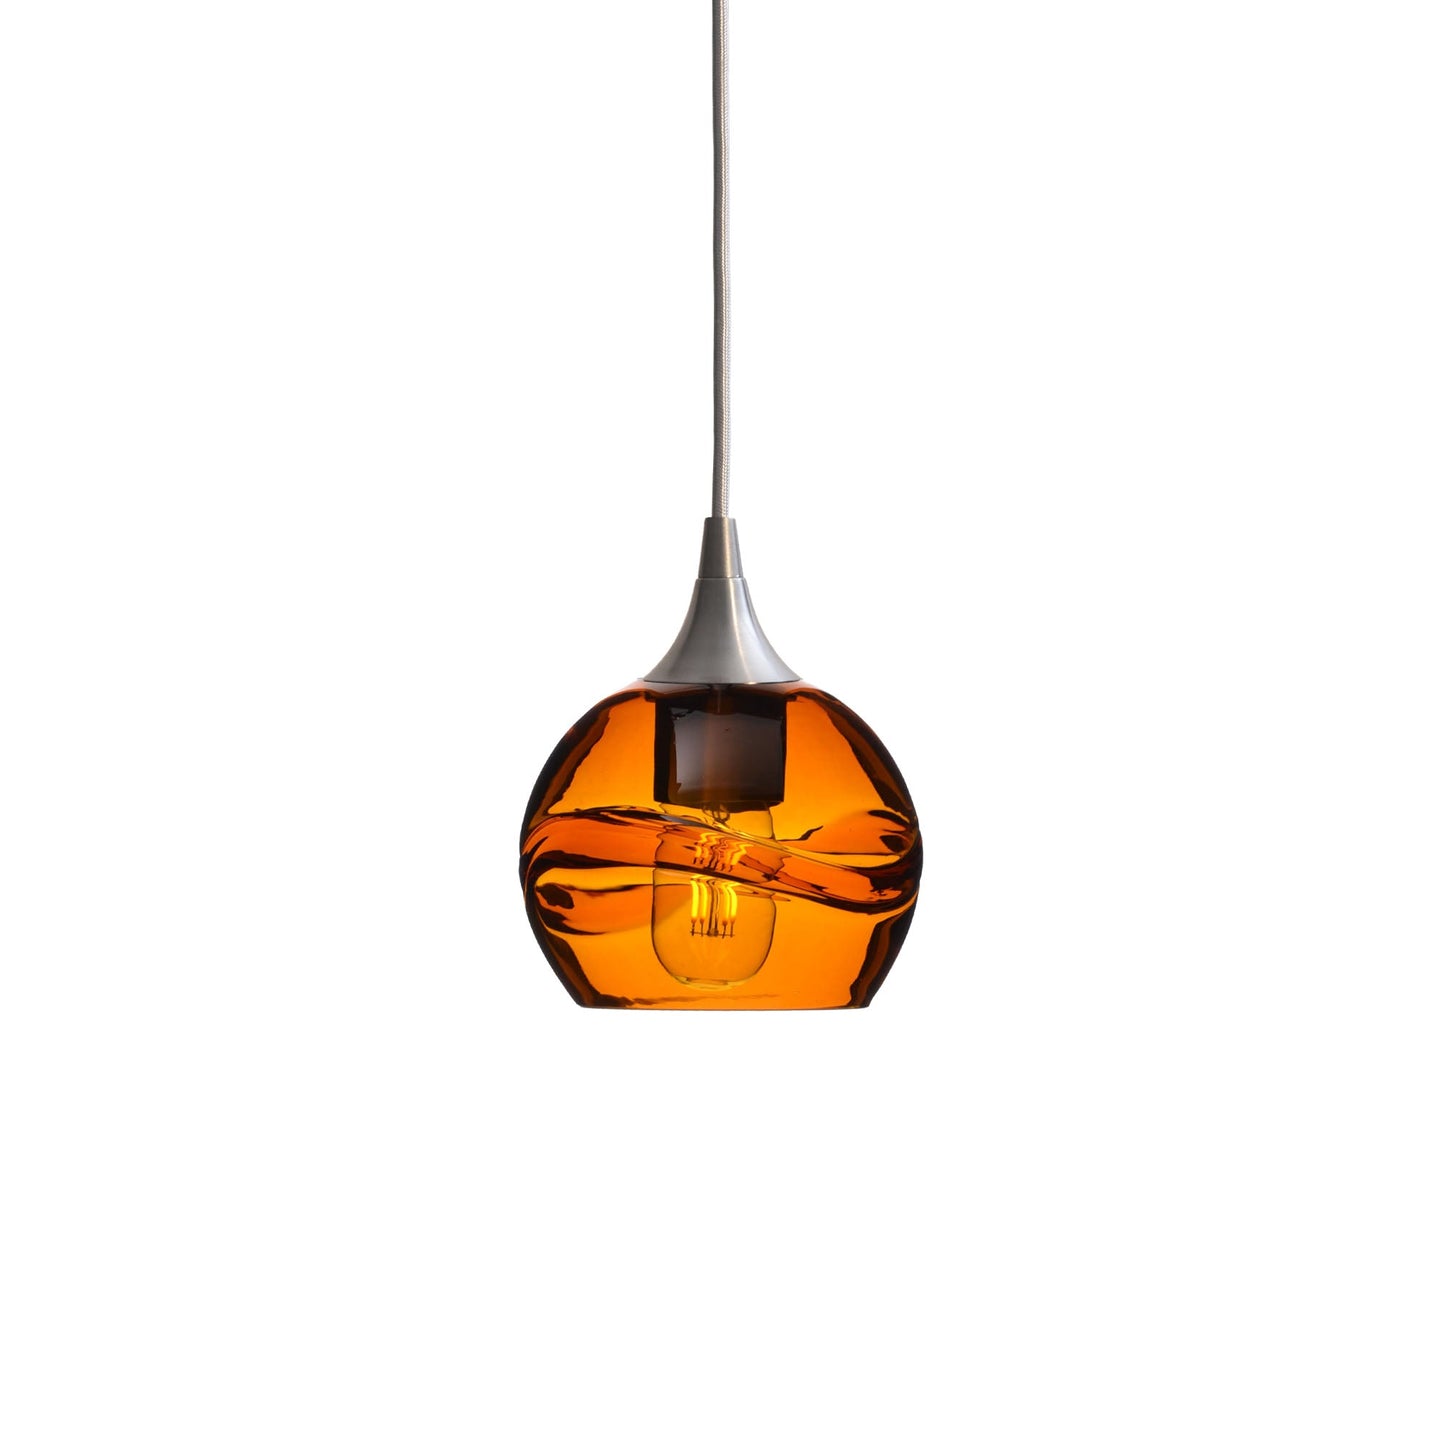 763 Swell: Single Pendant Light-Glass-Bicycle Glass Co - Hotshop-Harvest Gold-Brushed Nickel-Bicycle Glass Co